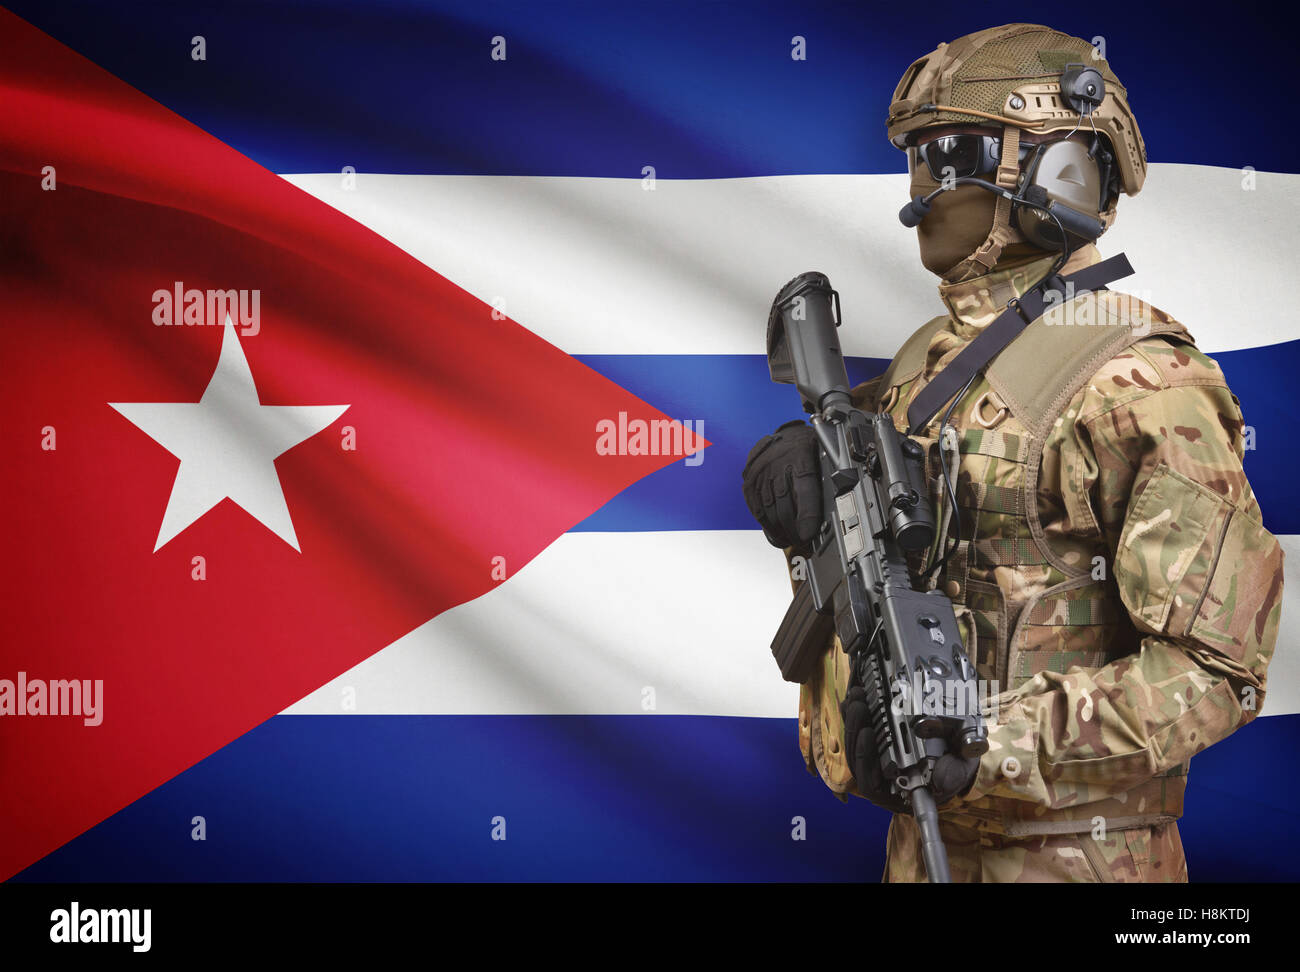 Soldier in helmet holding machine gun with national flag on background - Cuba Stock Photo